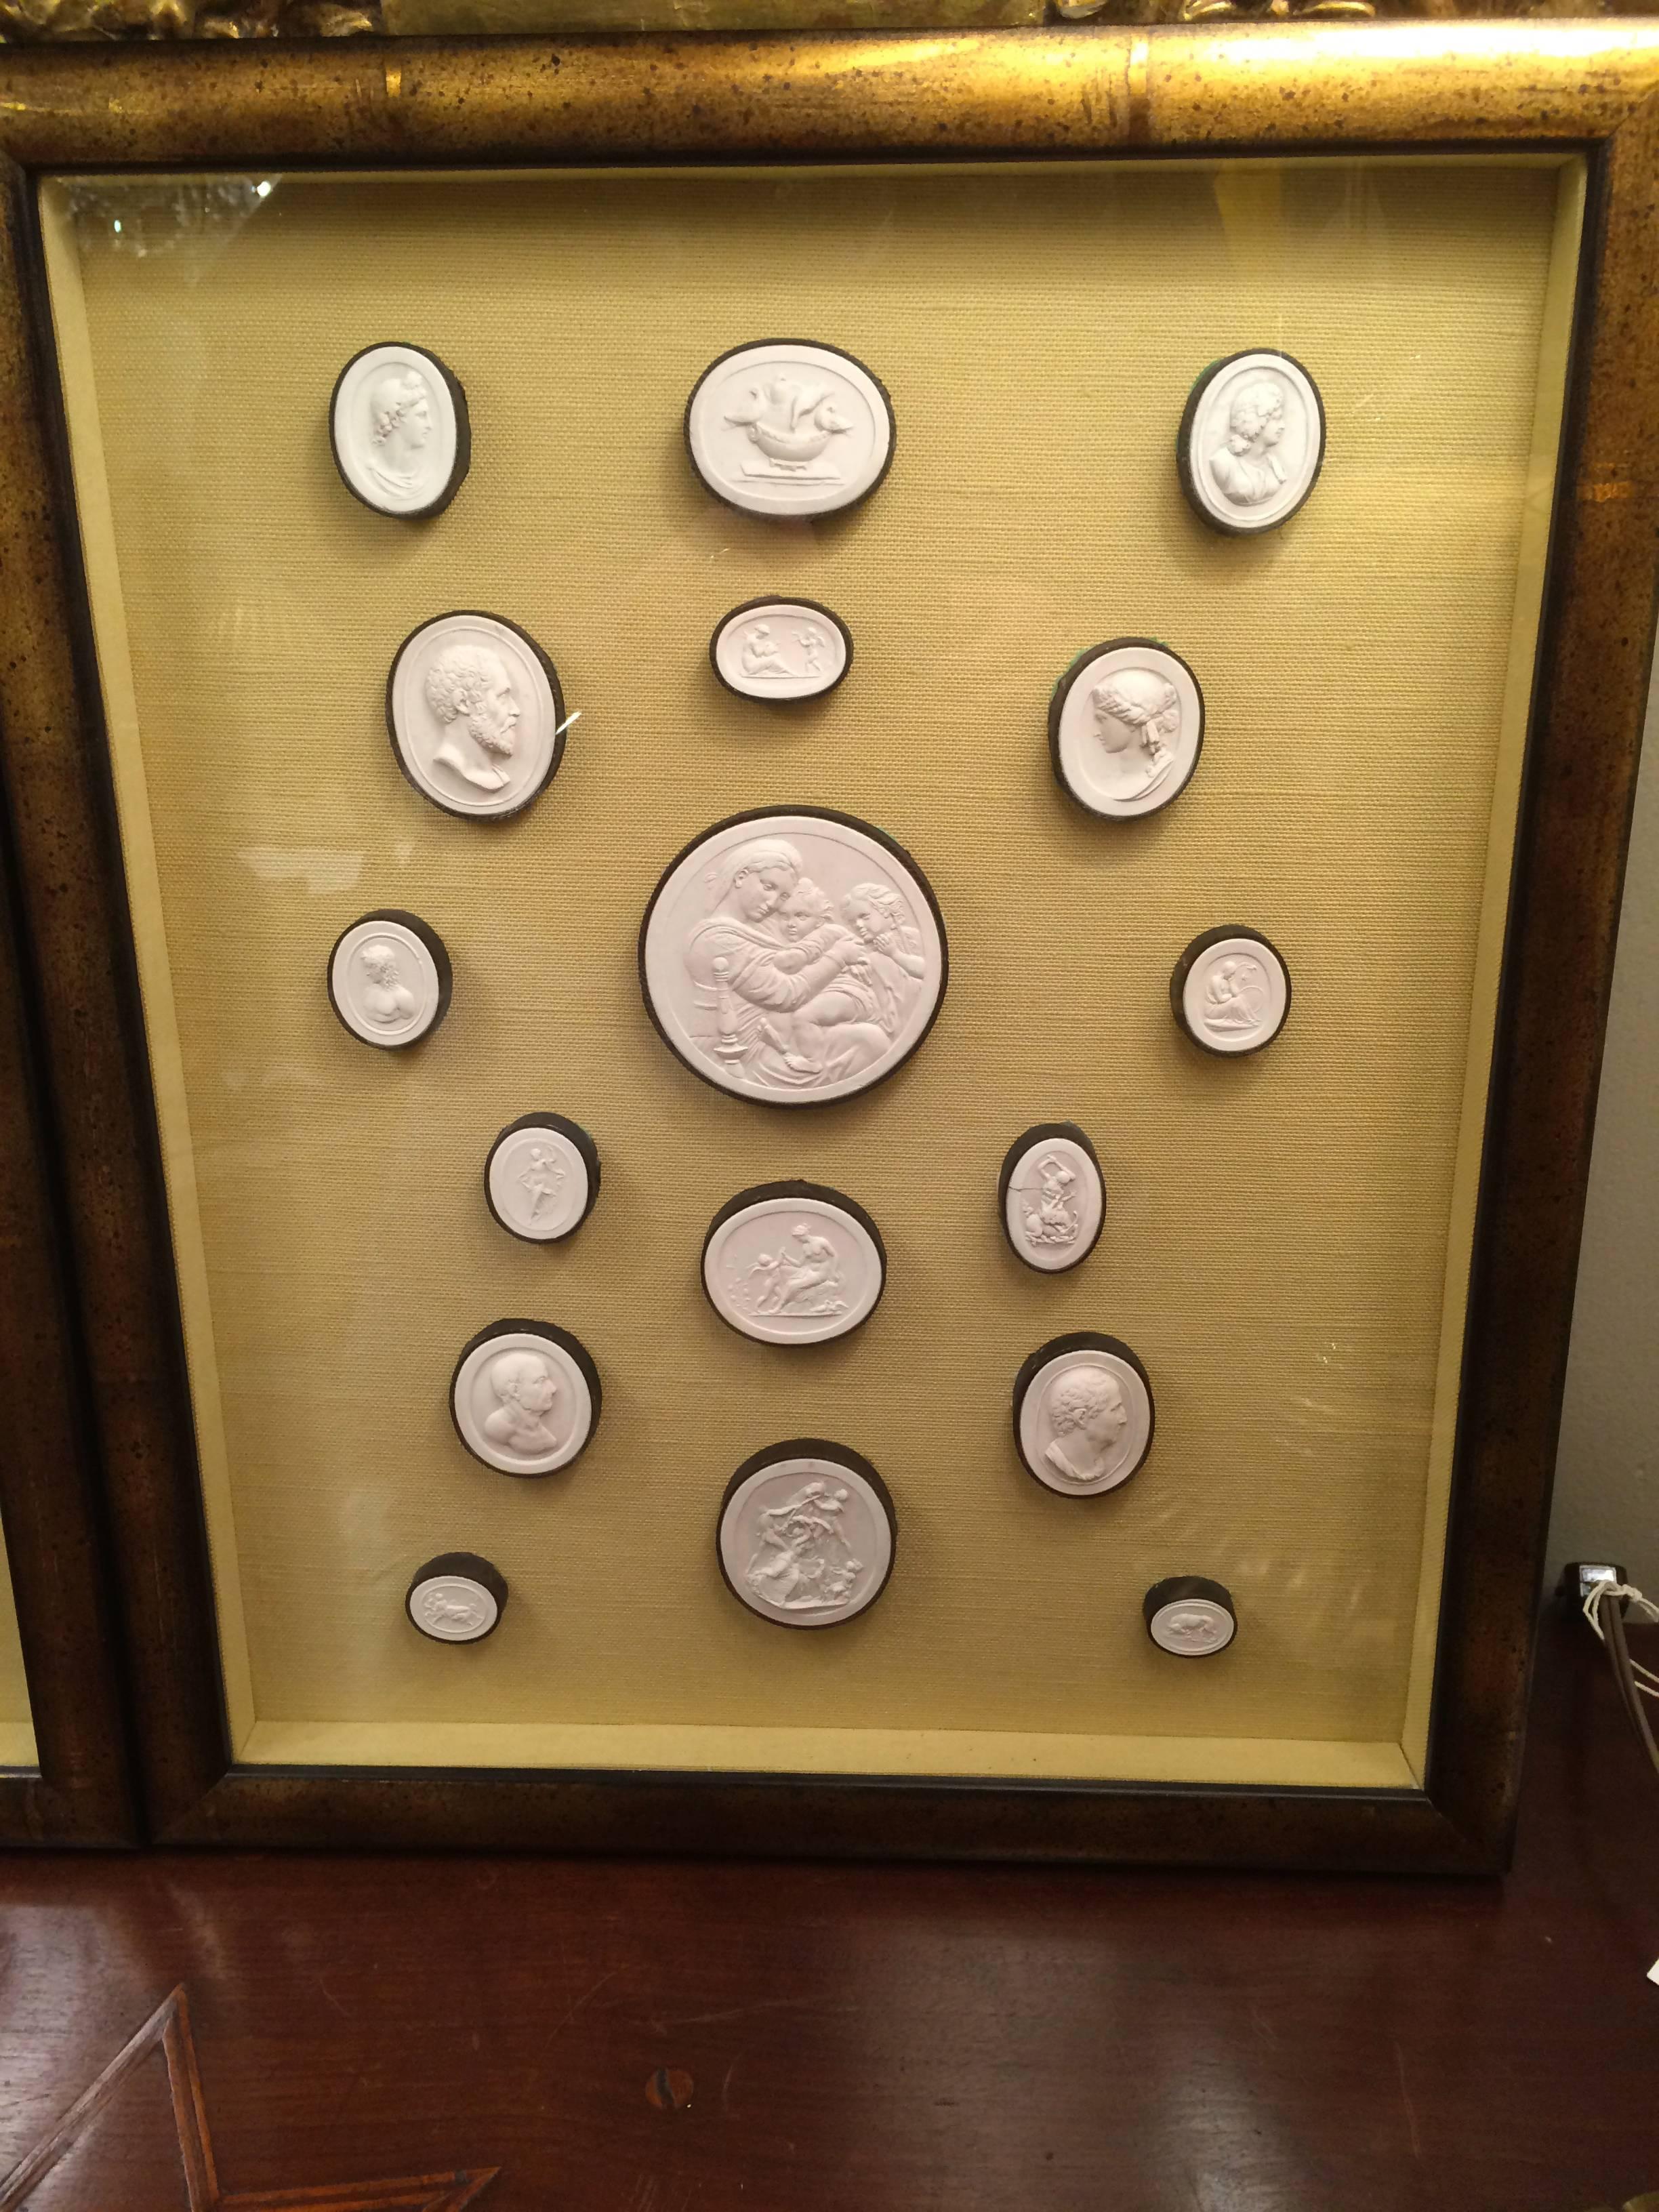 Set of 17 Italian 'Grand Tour' plaster intaglios depicting various famous works of art and antiquities. Mounted on pale gold silk in a gilt wood frame, circa 1820.

Can be purchased with the following item as a pair.

Made in Rome by Pietro